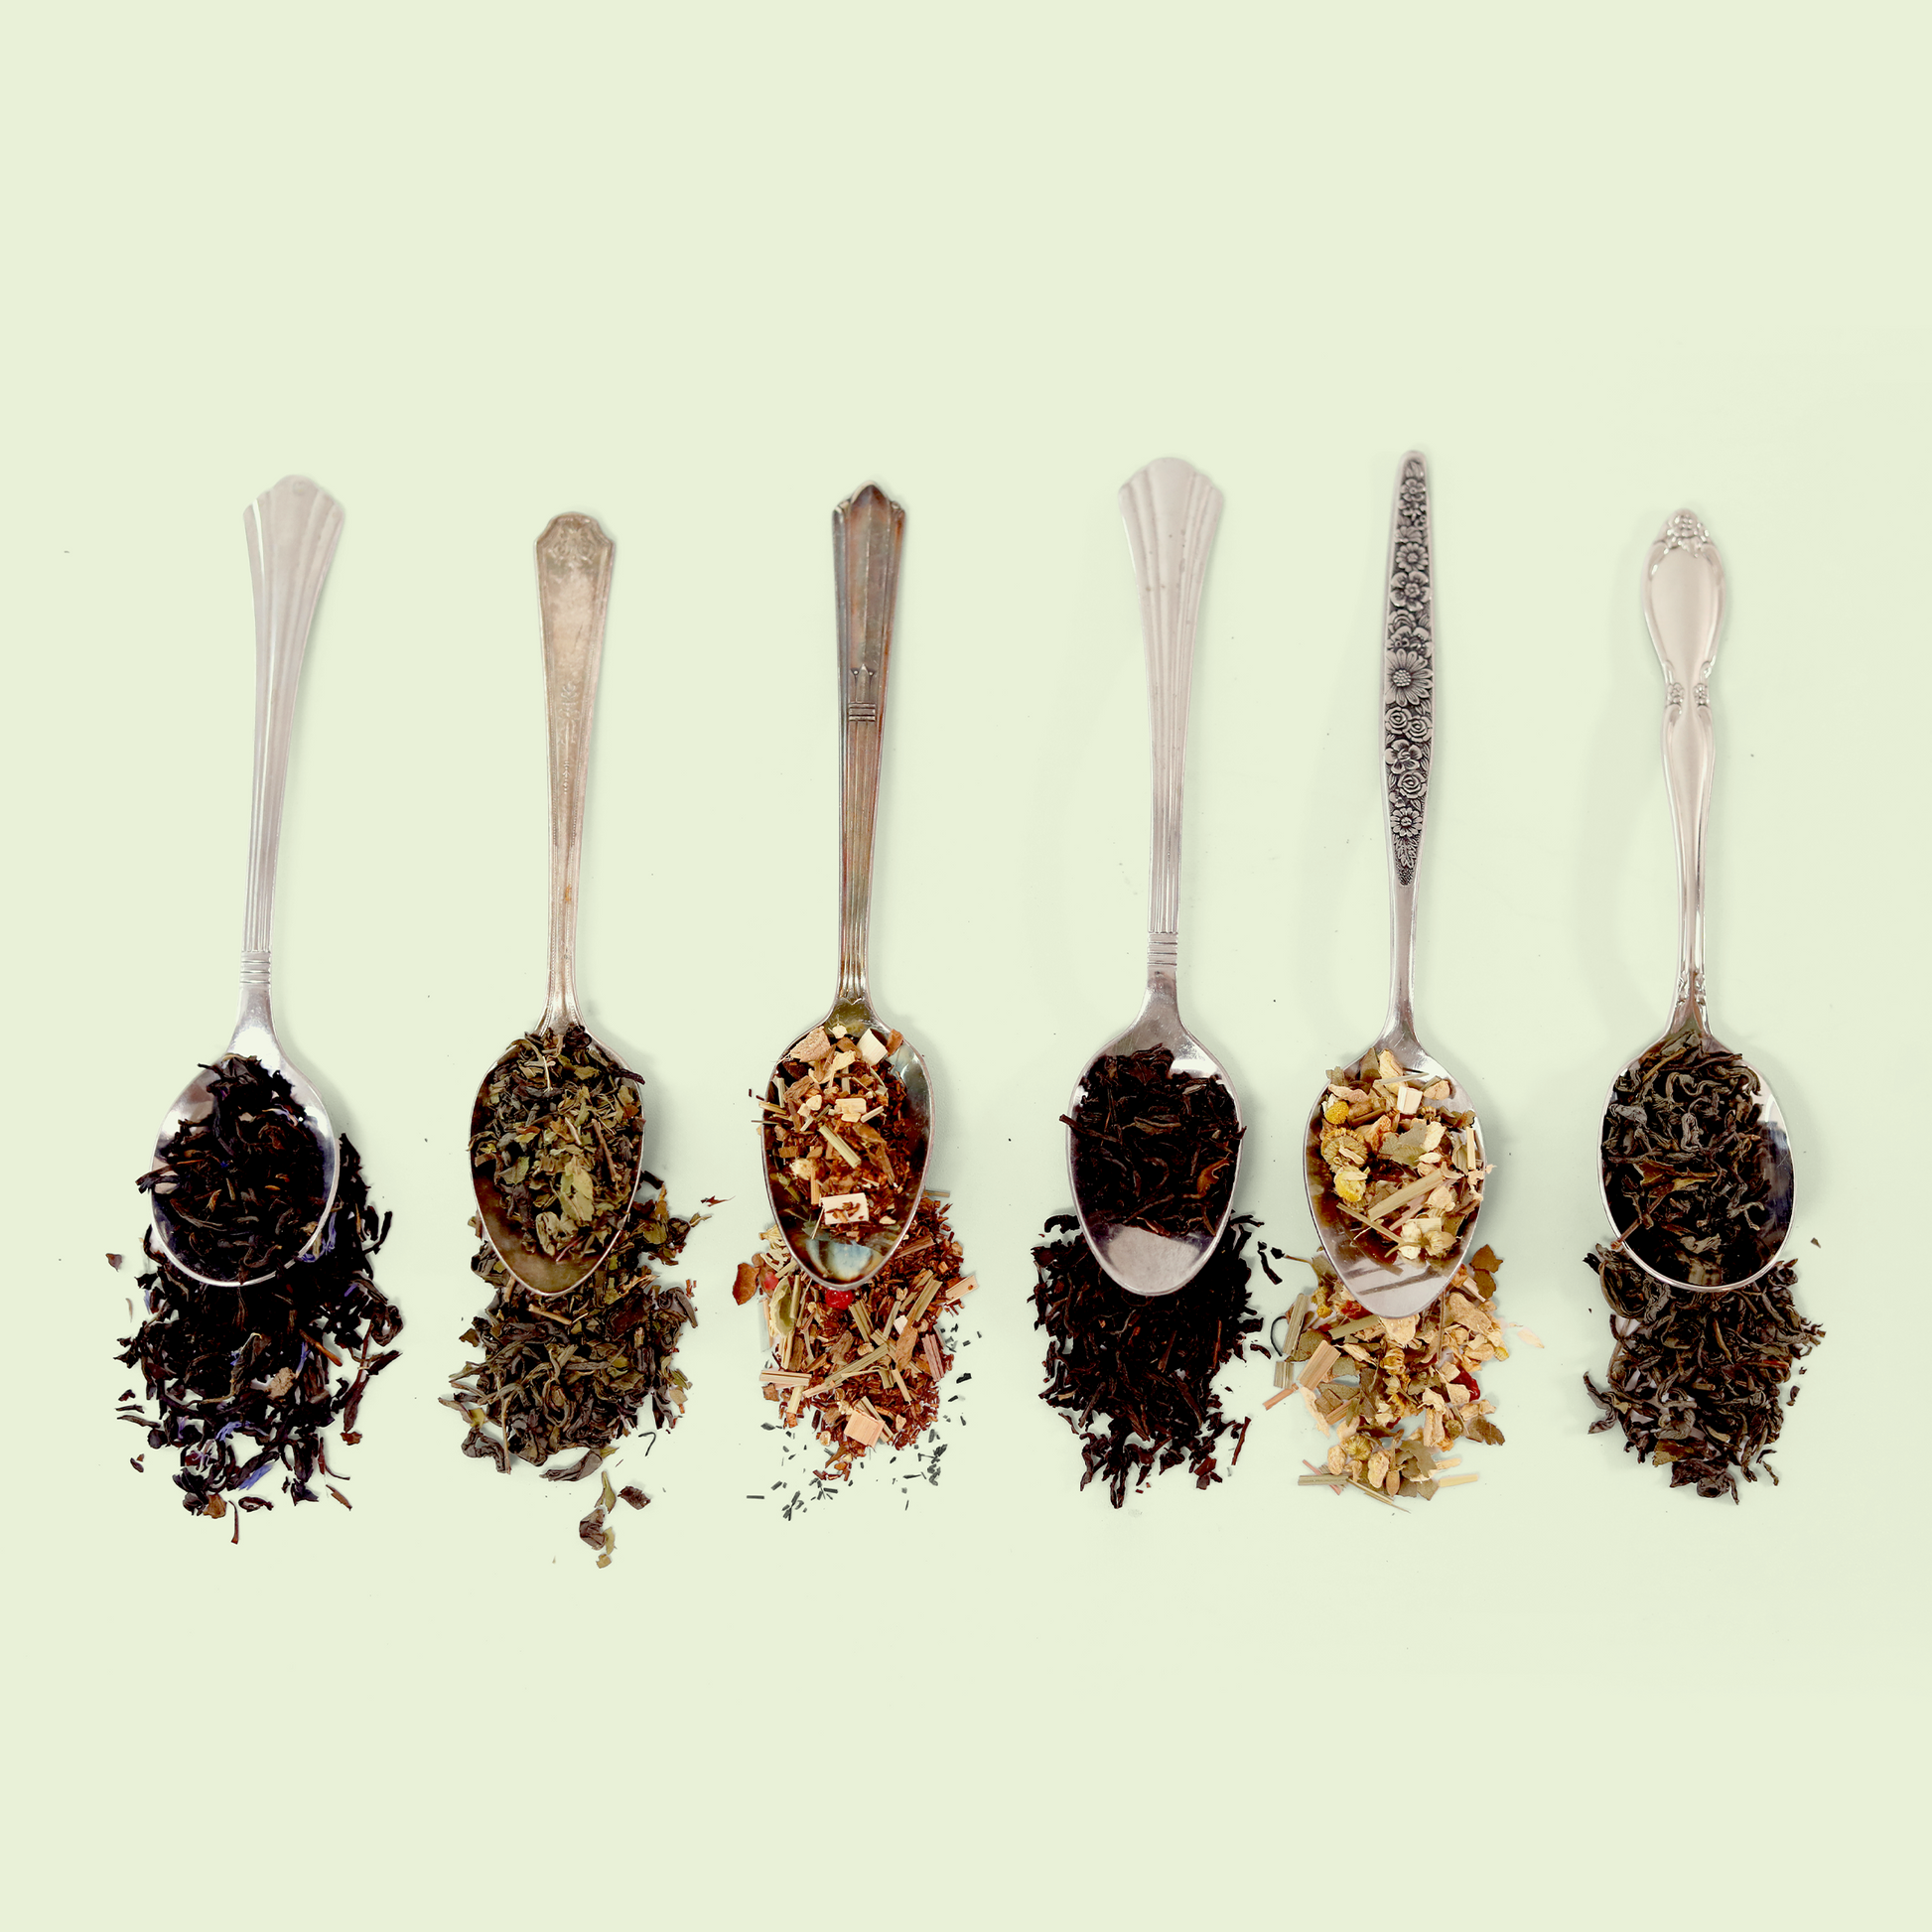 Six spoons are lined up on a light green background, each with different colored loose tea leaves sitting in and spilling out of the spoon. A Good Store product. 